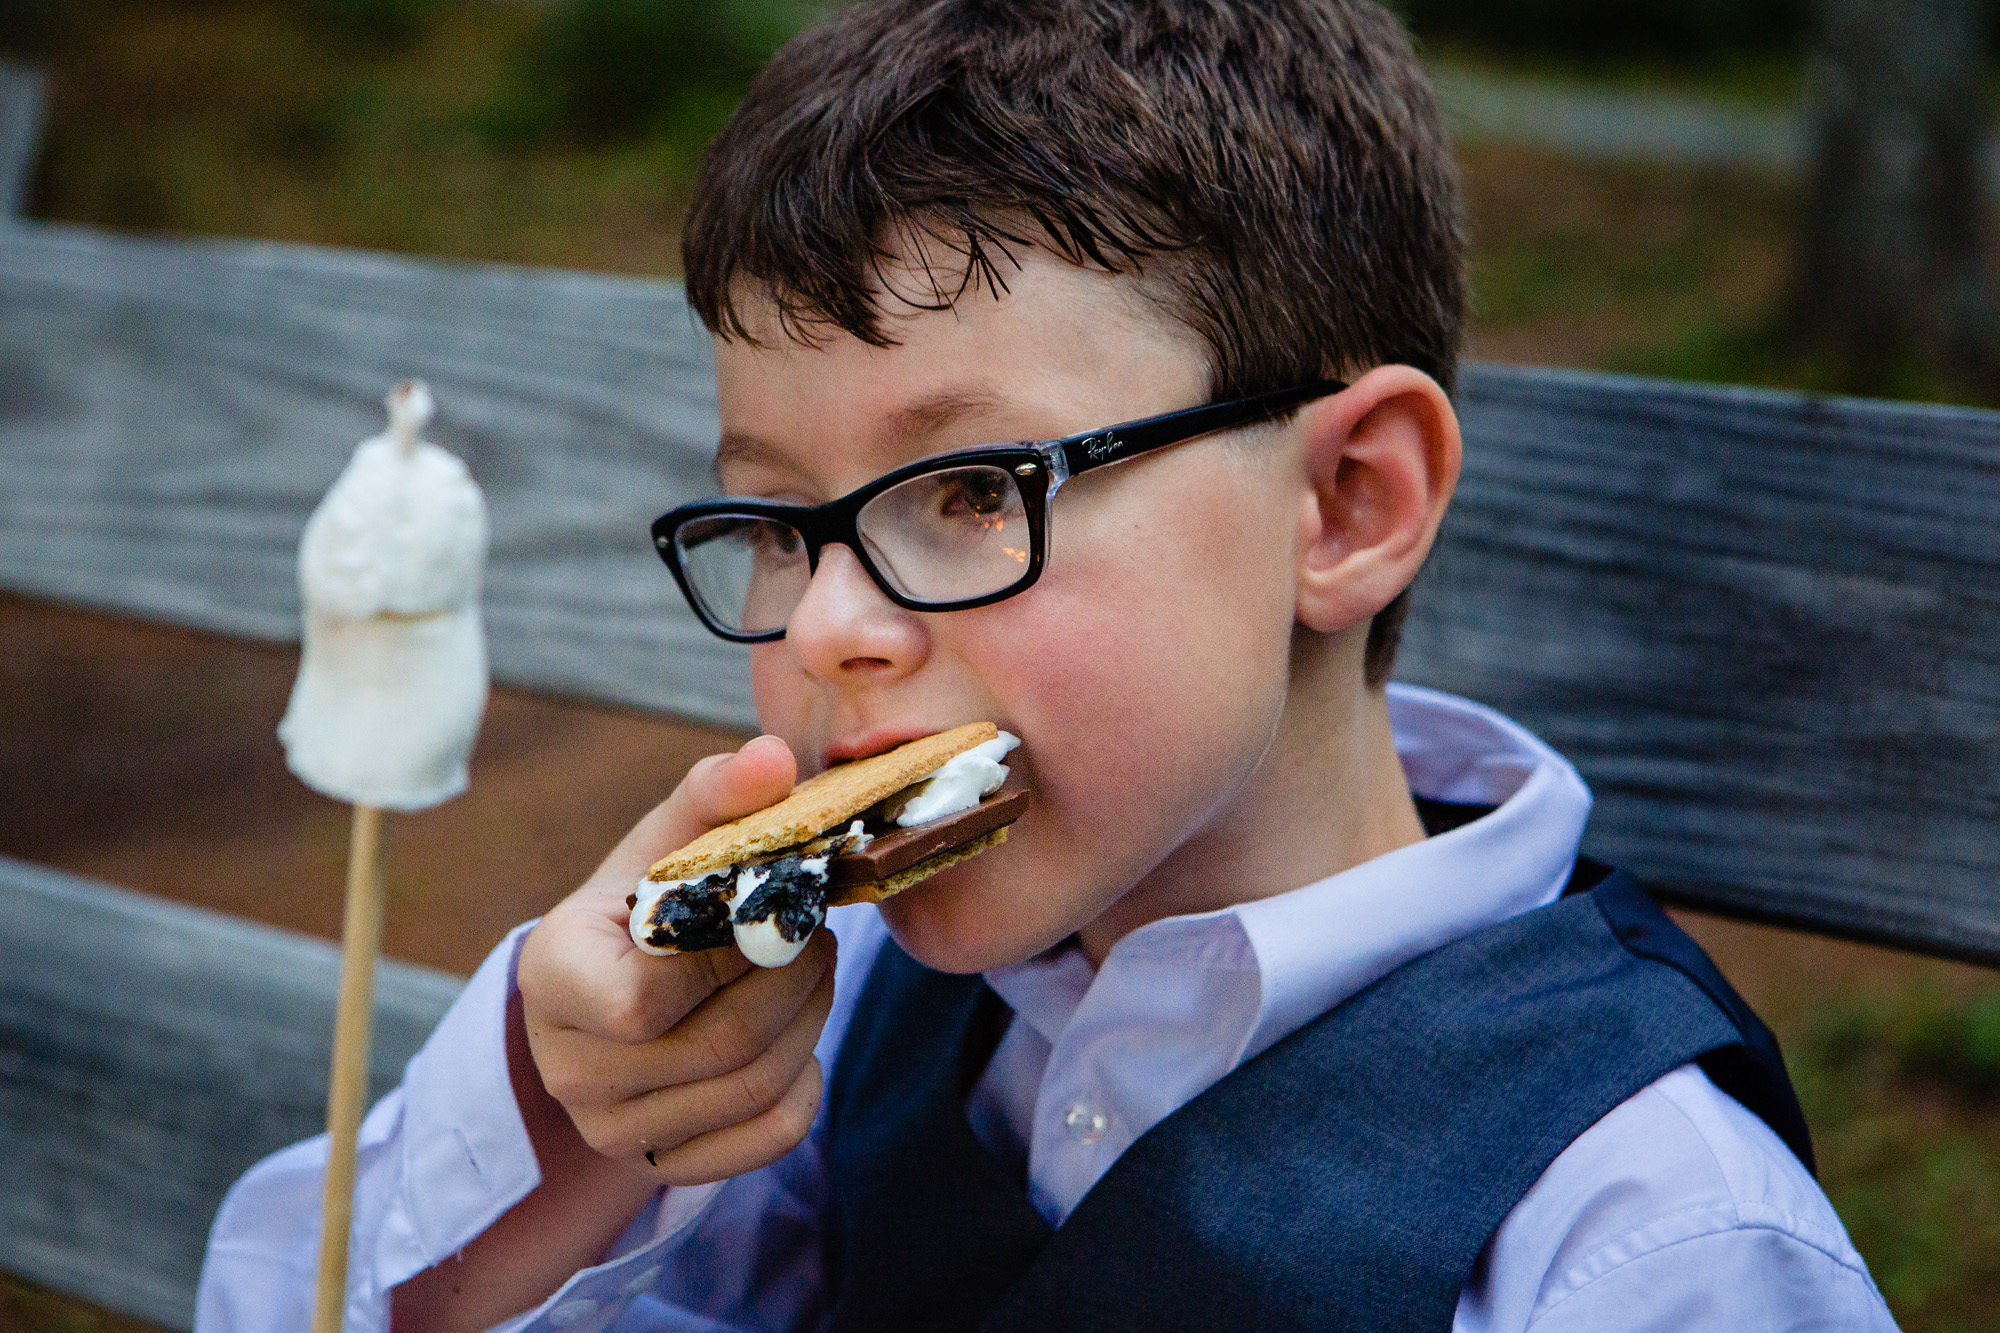 A kid stuffs a smore in his mouth at a lakeside wedding in Maine